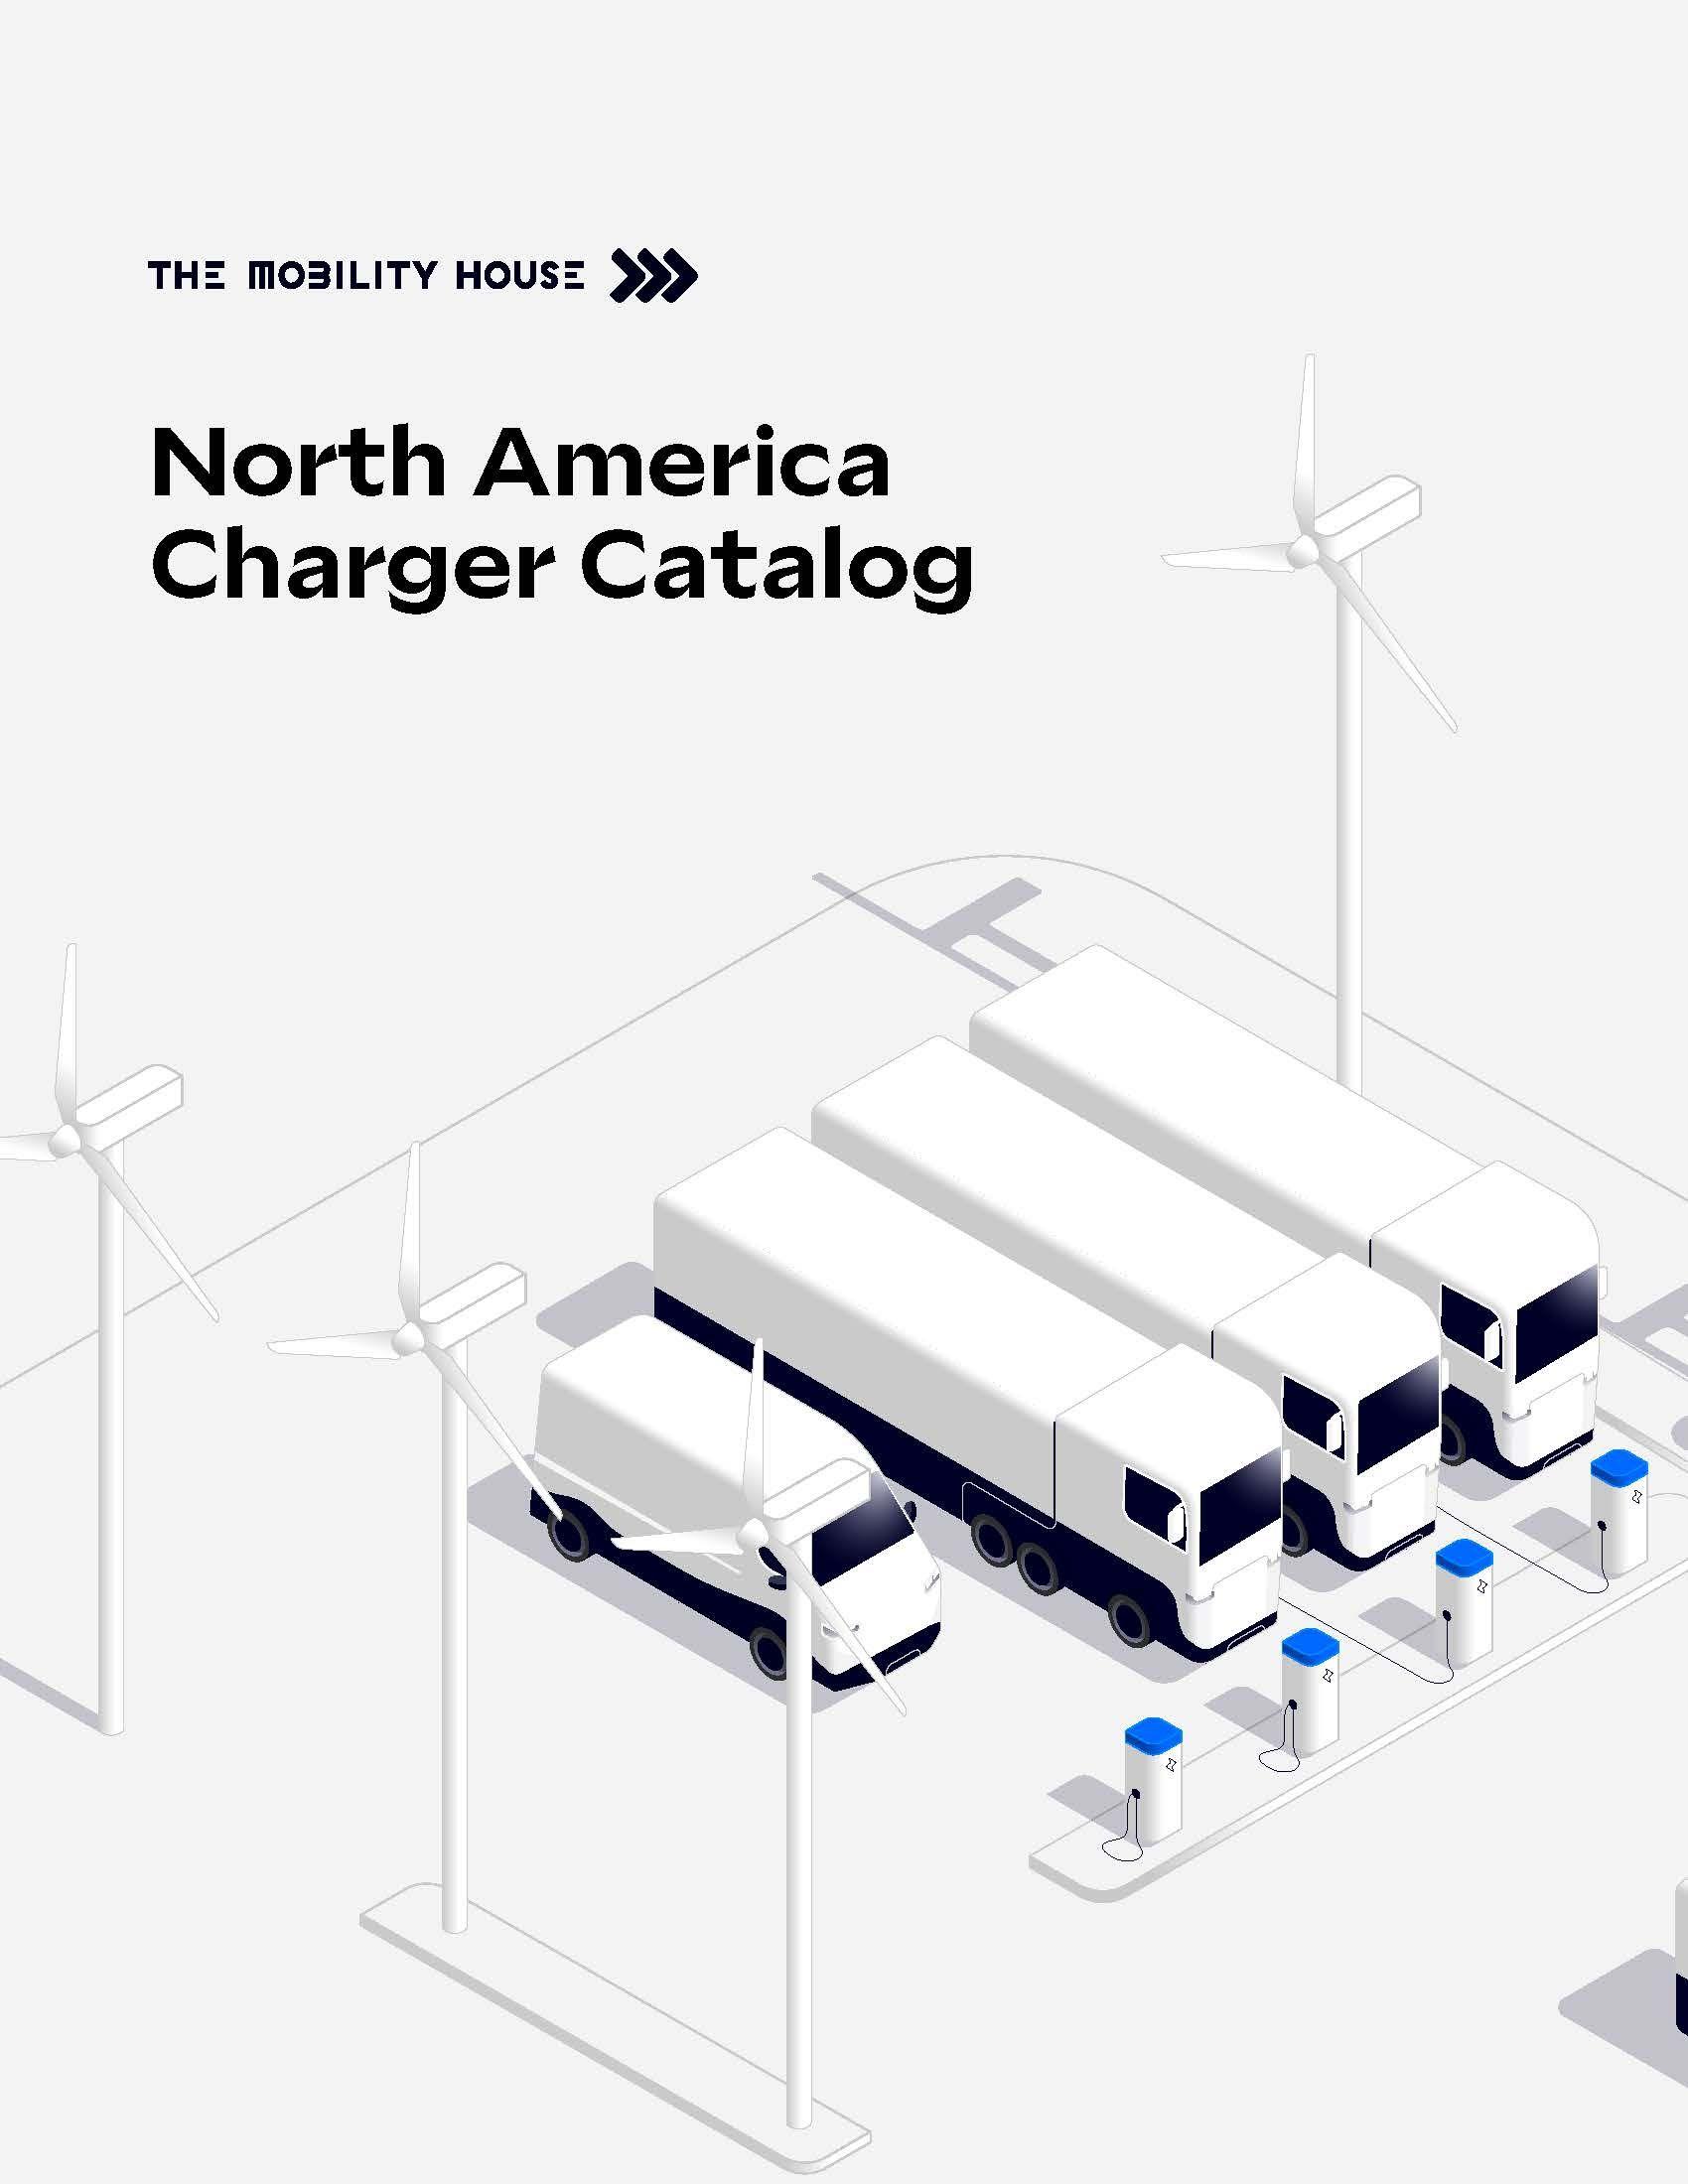 The Mobility House North America Charger Catalog